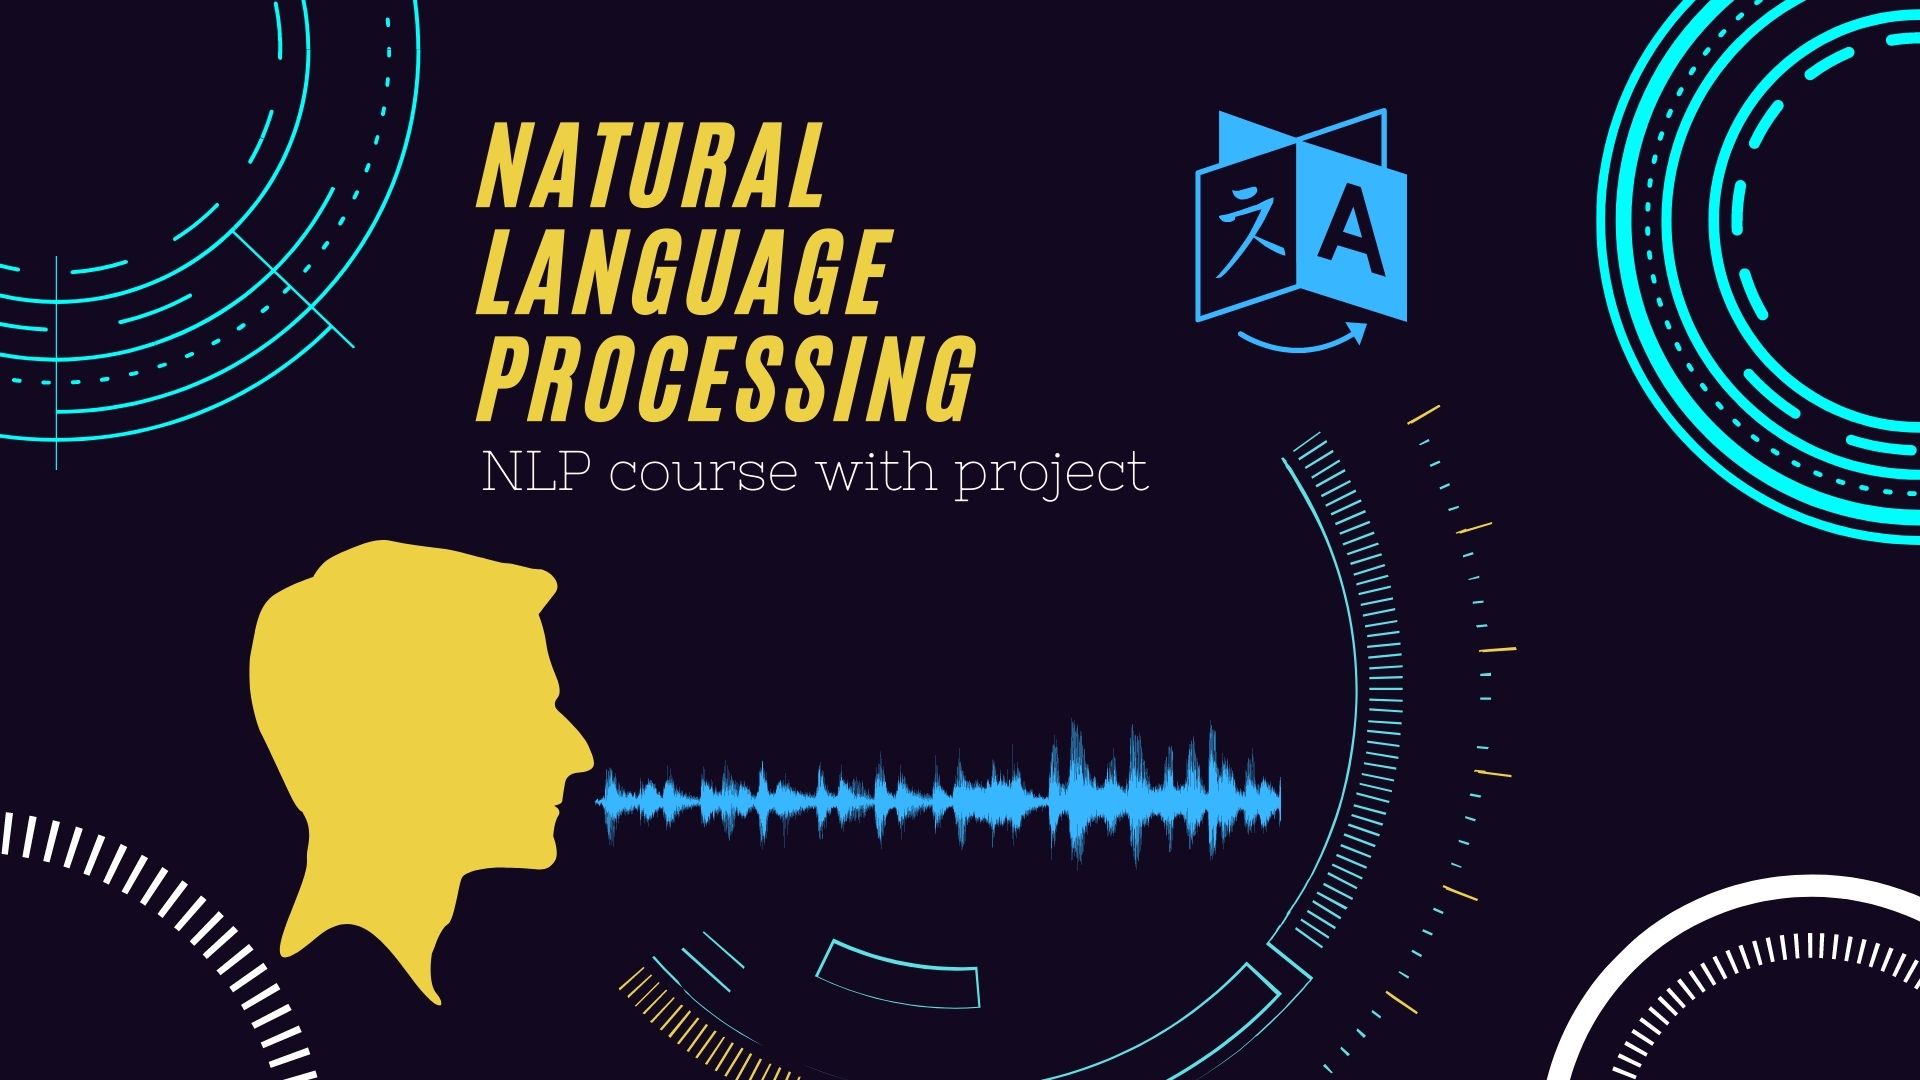 Natural Language Processing (NLP) course image